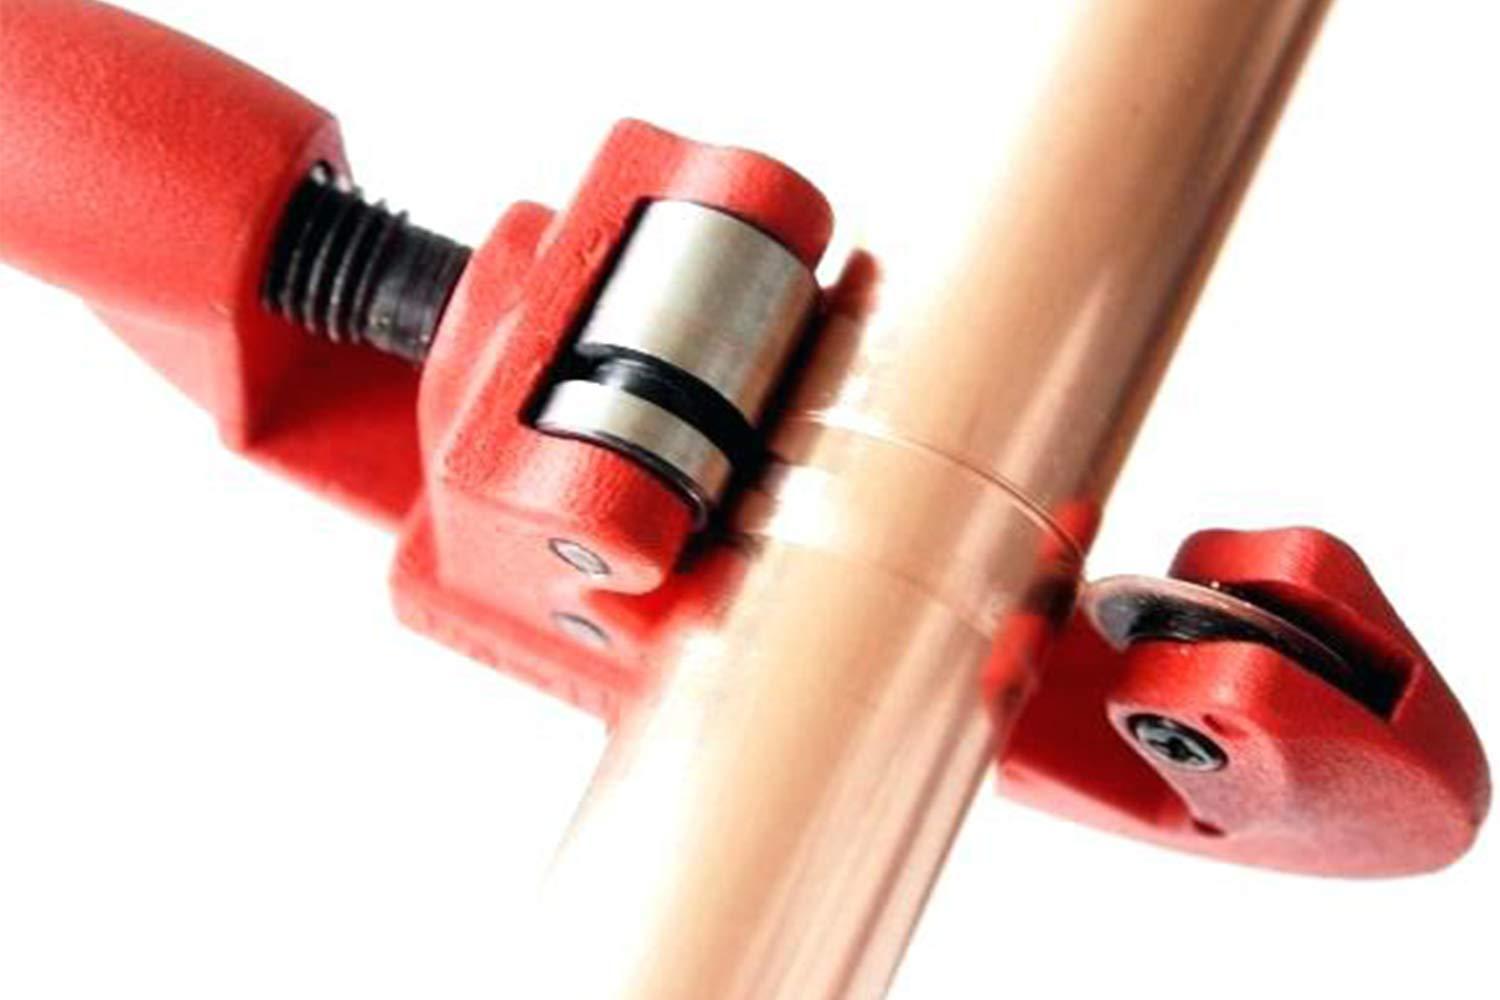 0438 Tubing Pipe Cutter - SkyShopy